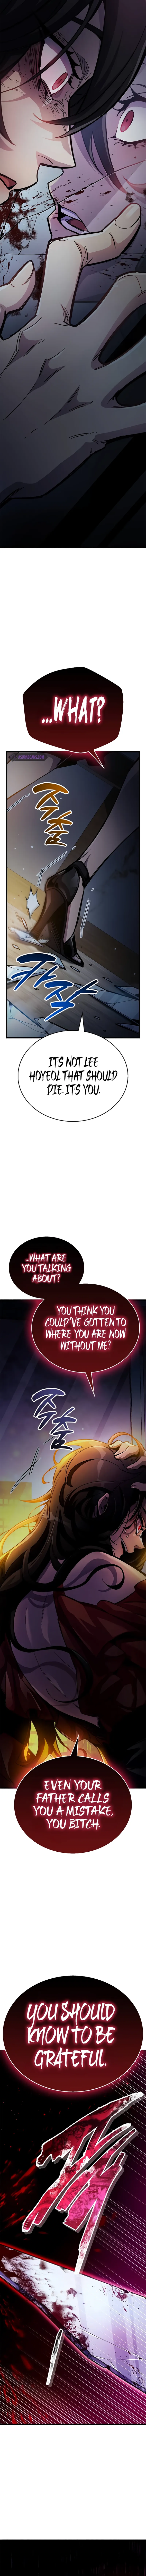 The Player Hides His Past Chapter 38 page 15